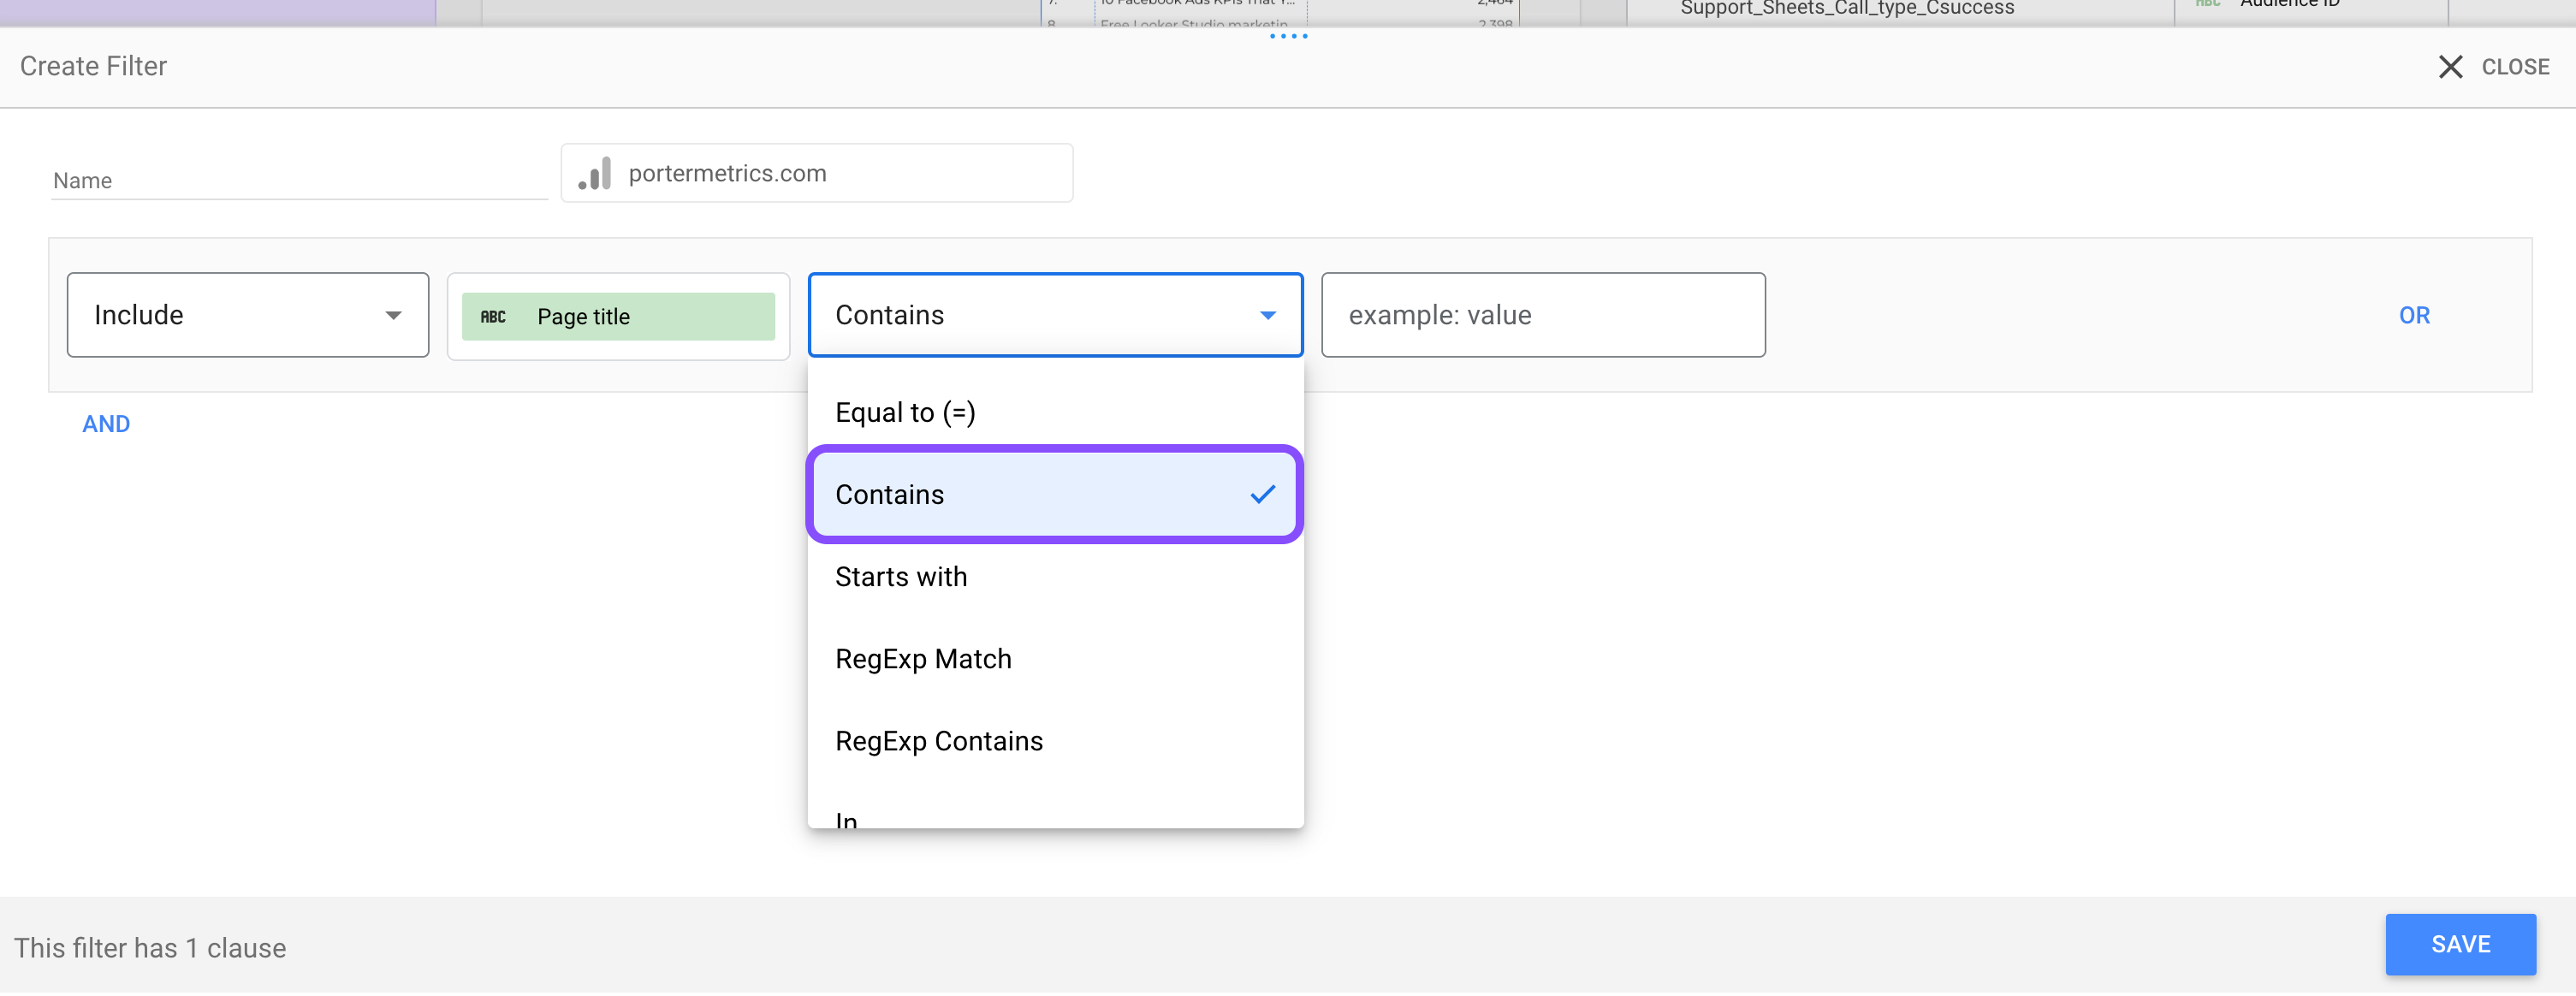 How To Create Filters On Google Looker Studio-Contains